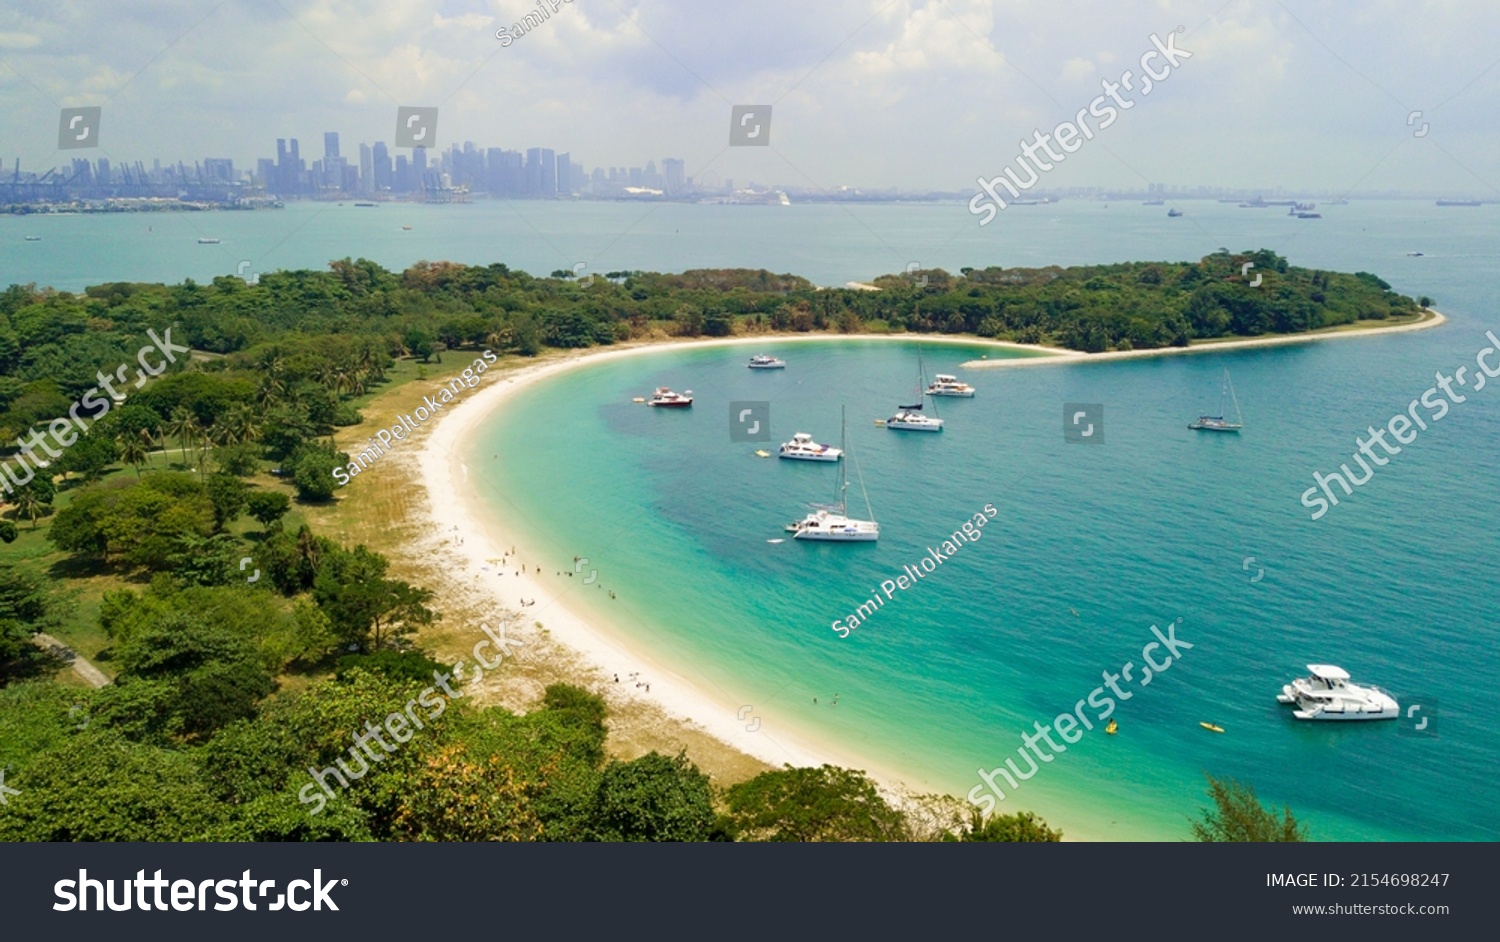 Aerial picture of Lazarus Island in Singapore. View to the beach. Sunny warm day. Turquoise water and green forest. Boats anchored in shore water. The center of Singapore is visible on the horizon. #2154698247